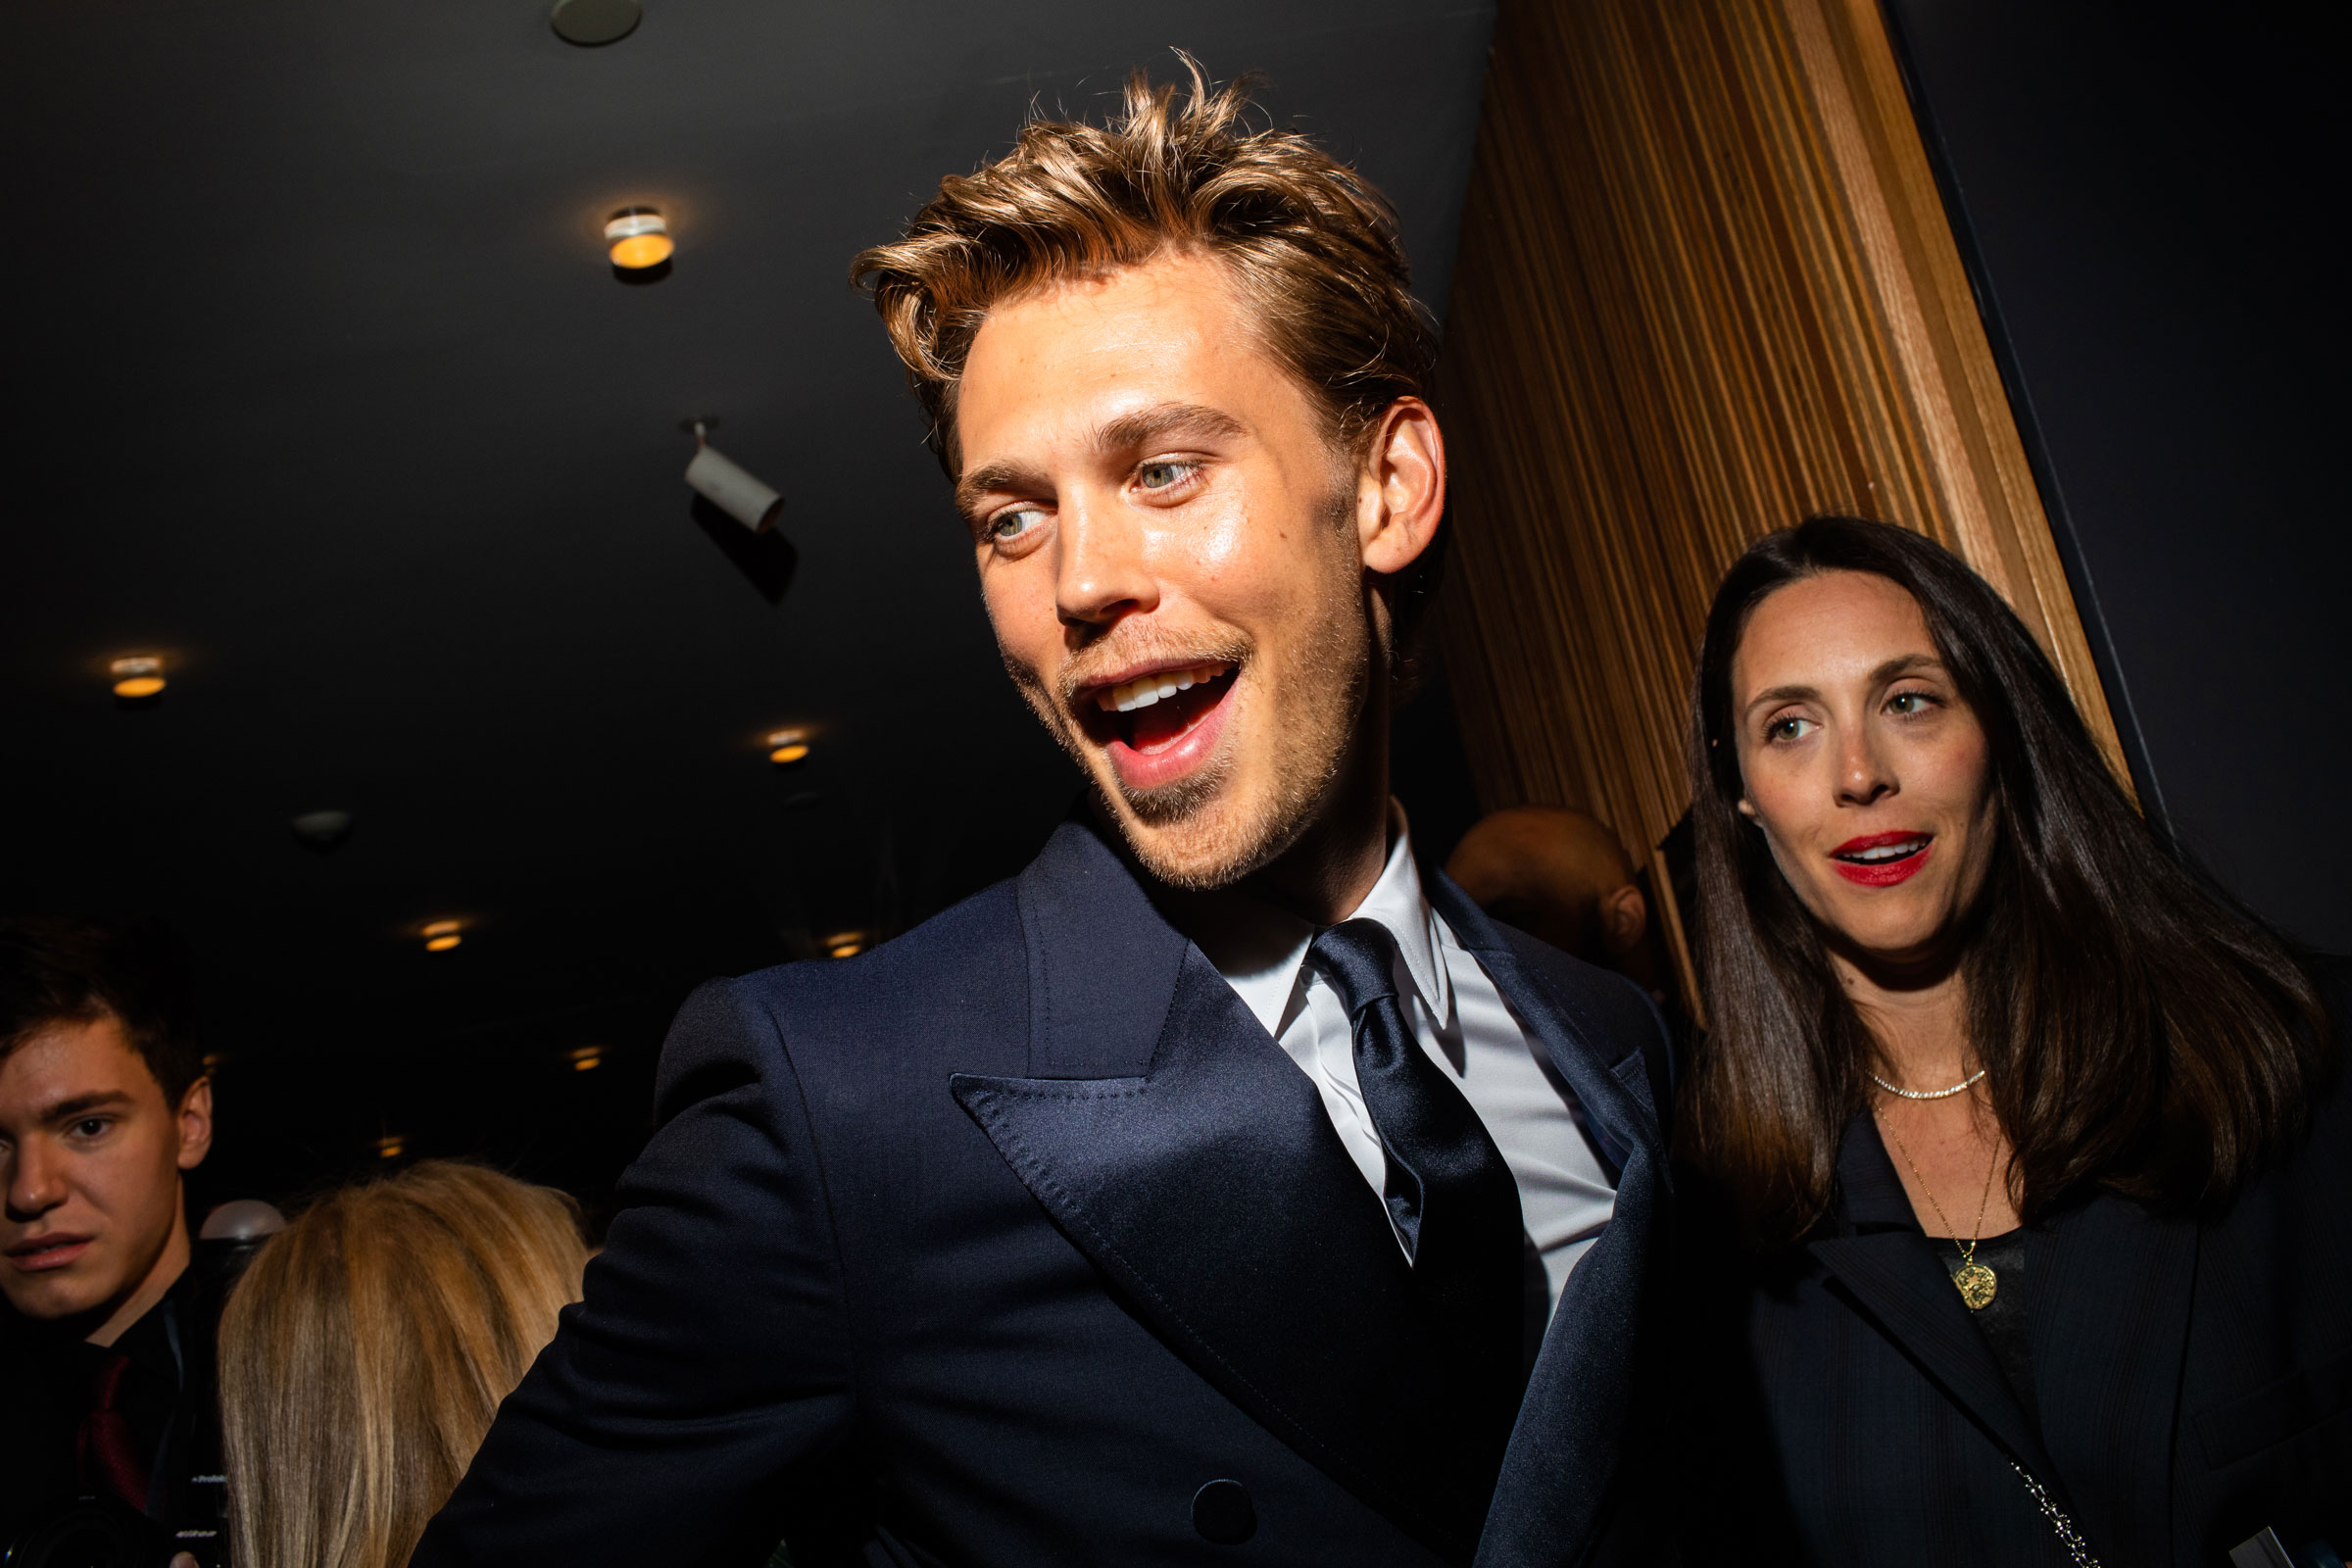 Austin Butler attends the TIME 100 Gala at Jazz at Lincoln Center in New York City, on April 26, 2023. (Landon Nordeman for TIME)